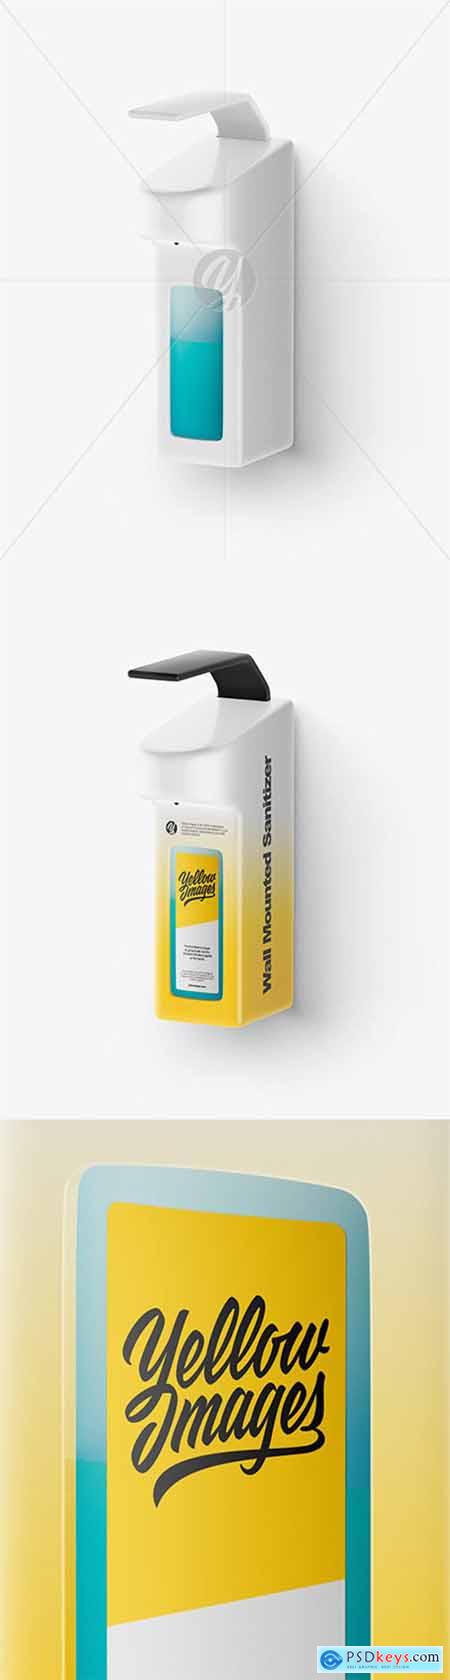 Wall Dispenser with Hand Sanitizer Mockup 58512